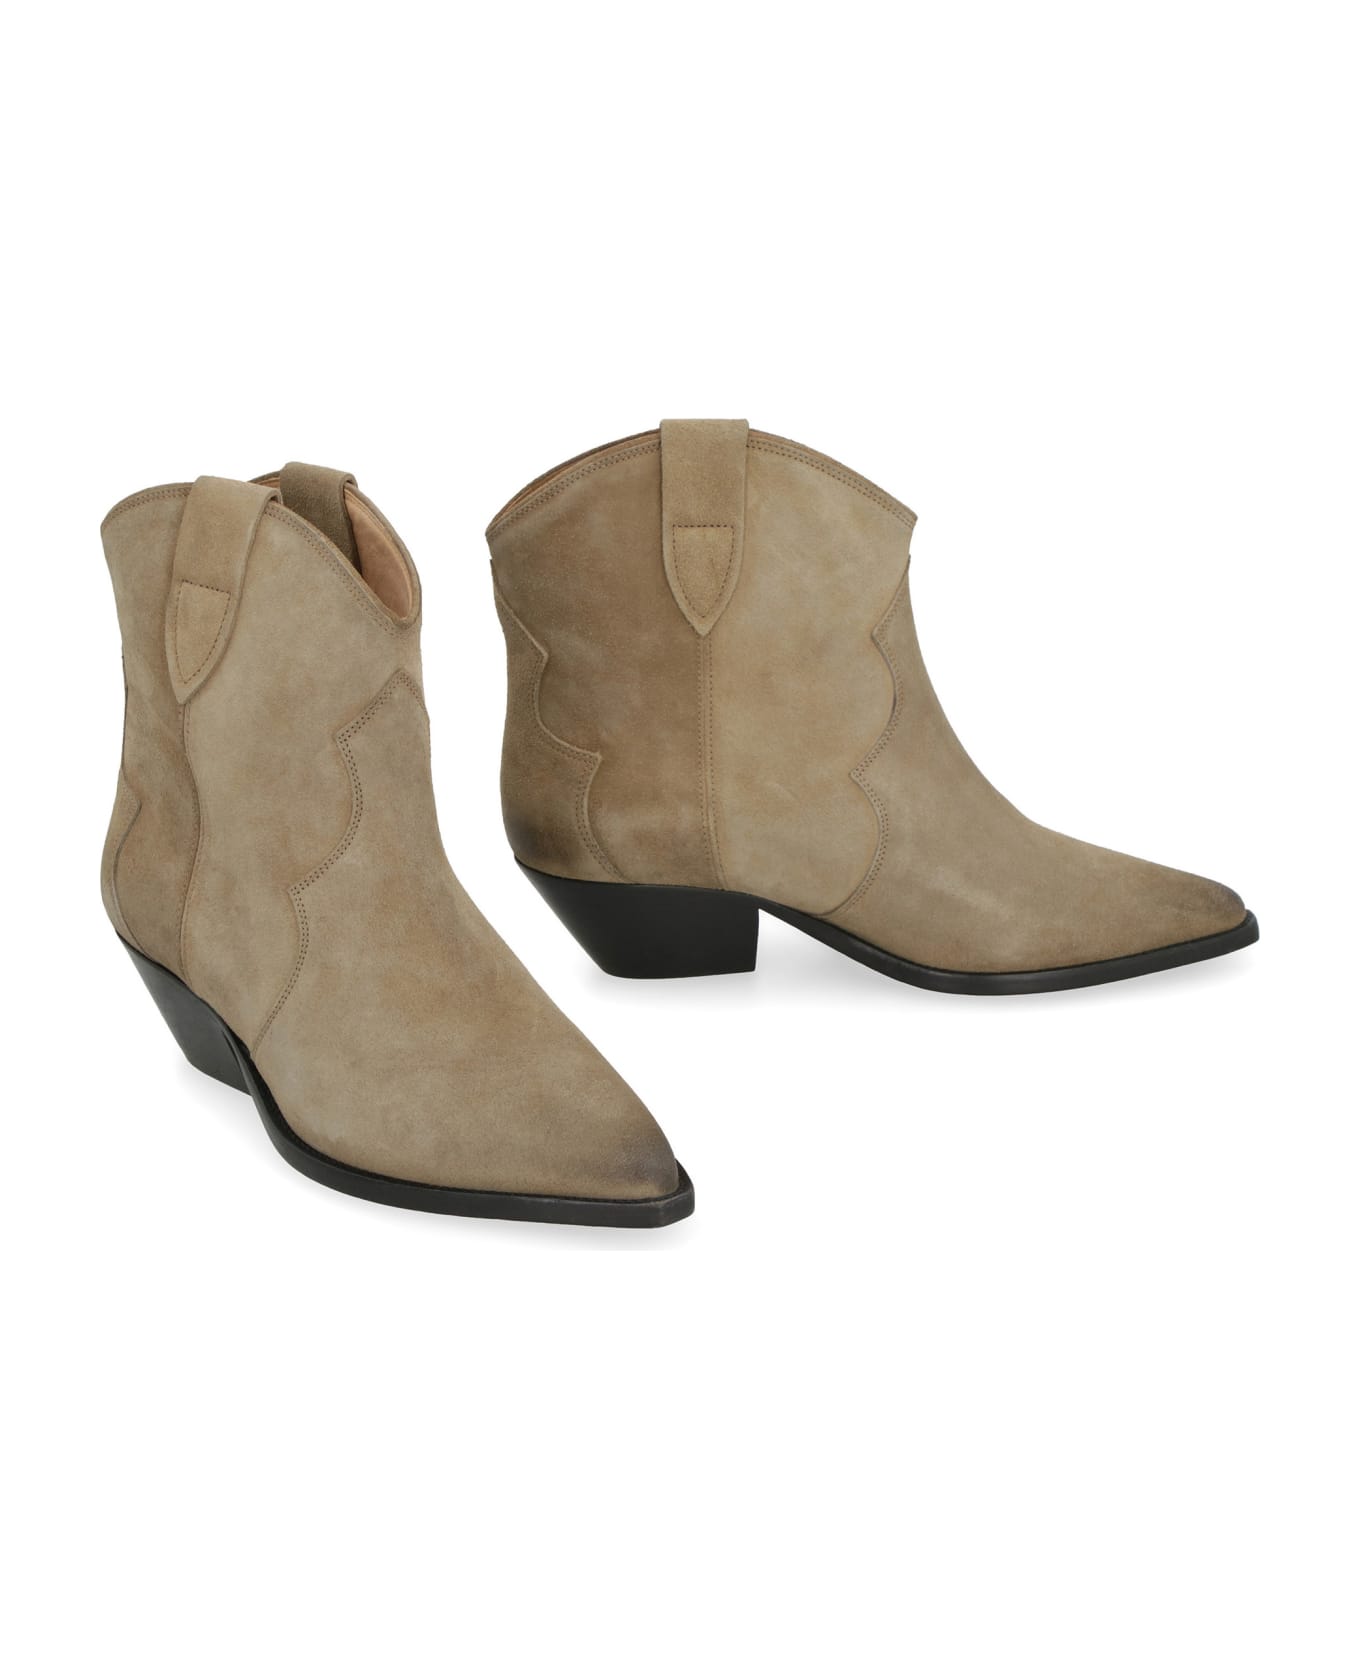 Isabel Marant Dewina Suede Ankle Boots - Dove Grey ブーツ